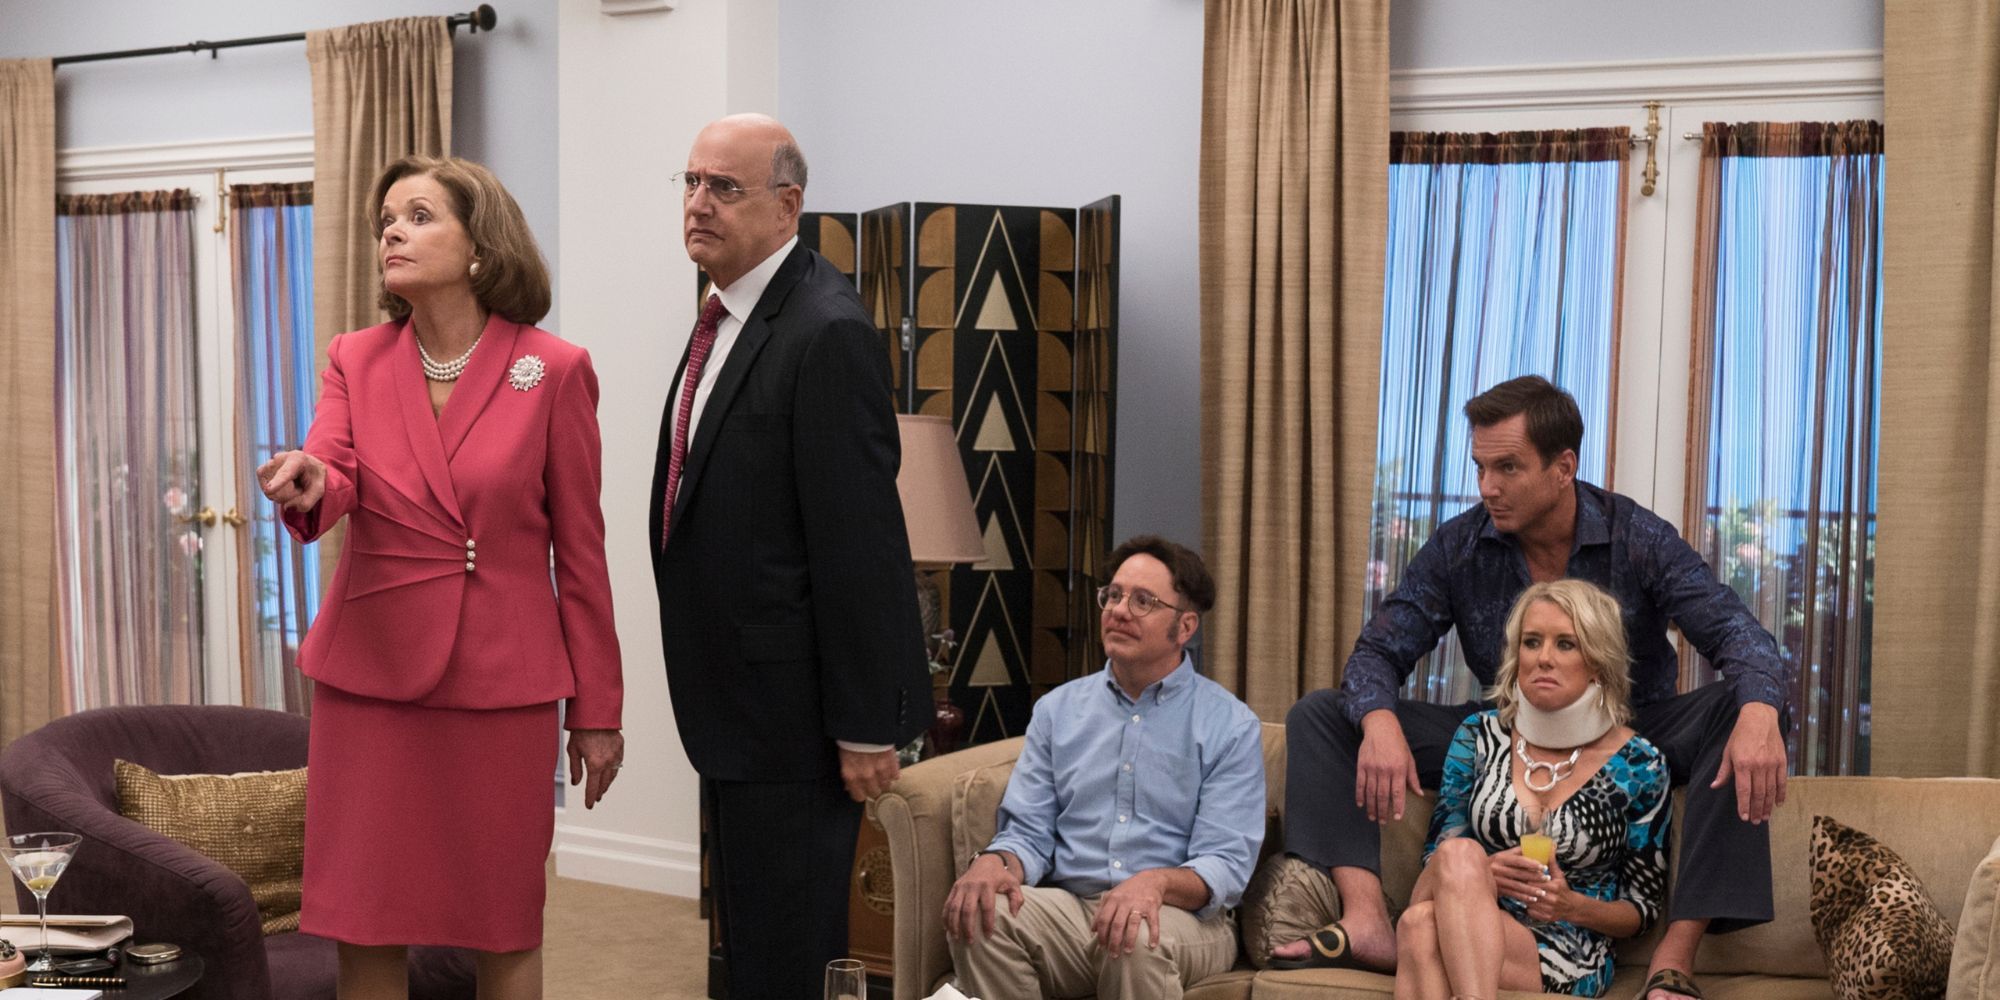 The Bluth family from Arrested Development sitting together